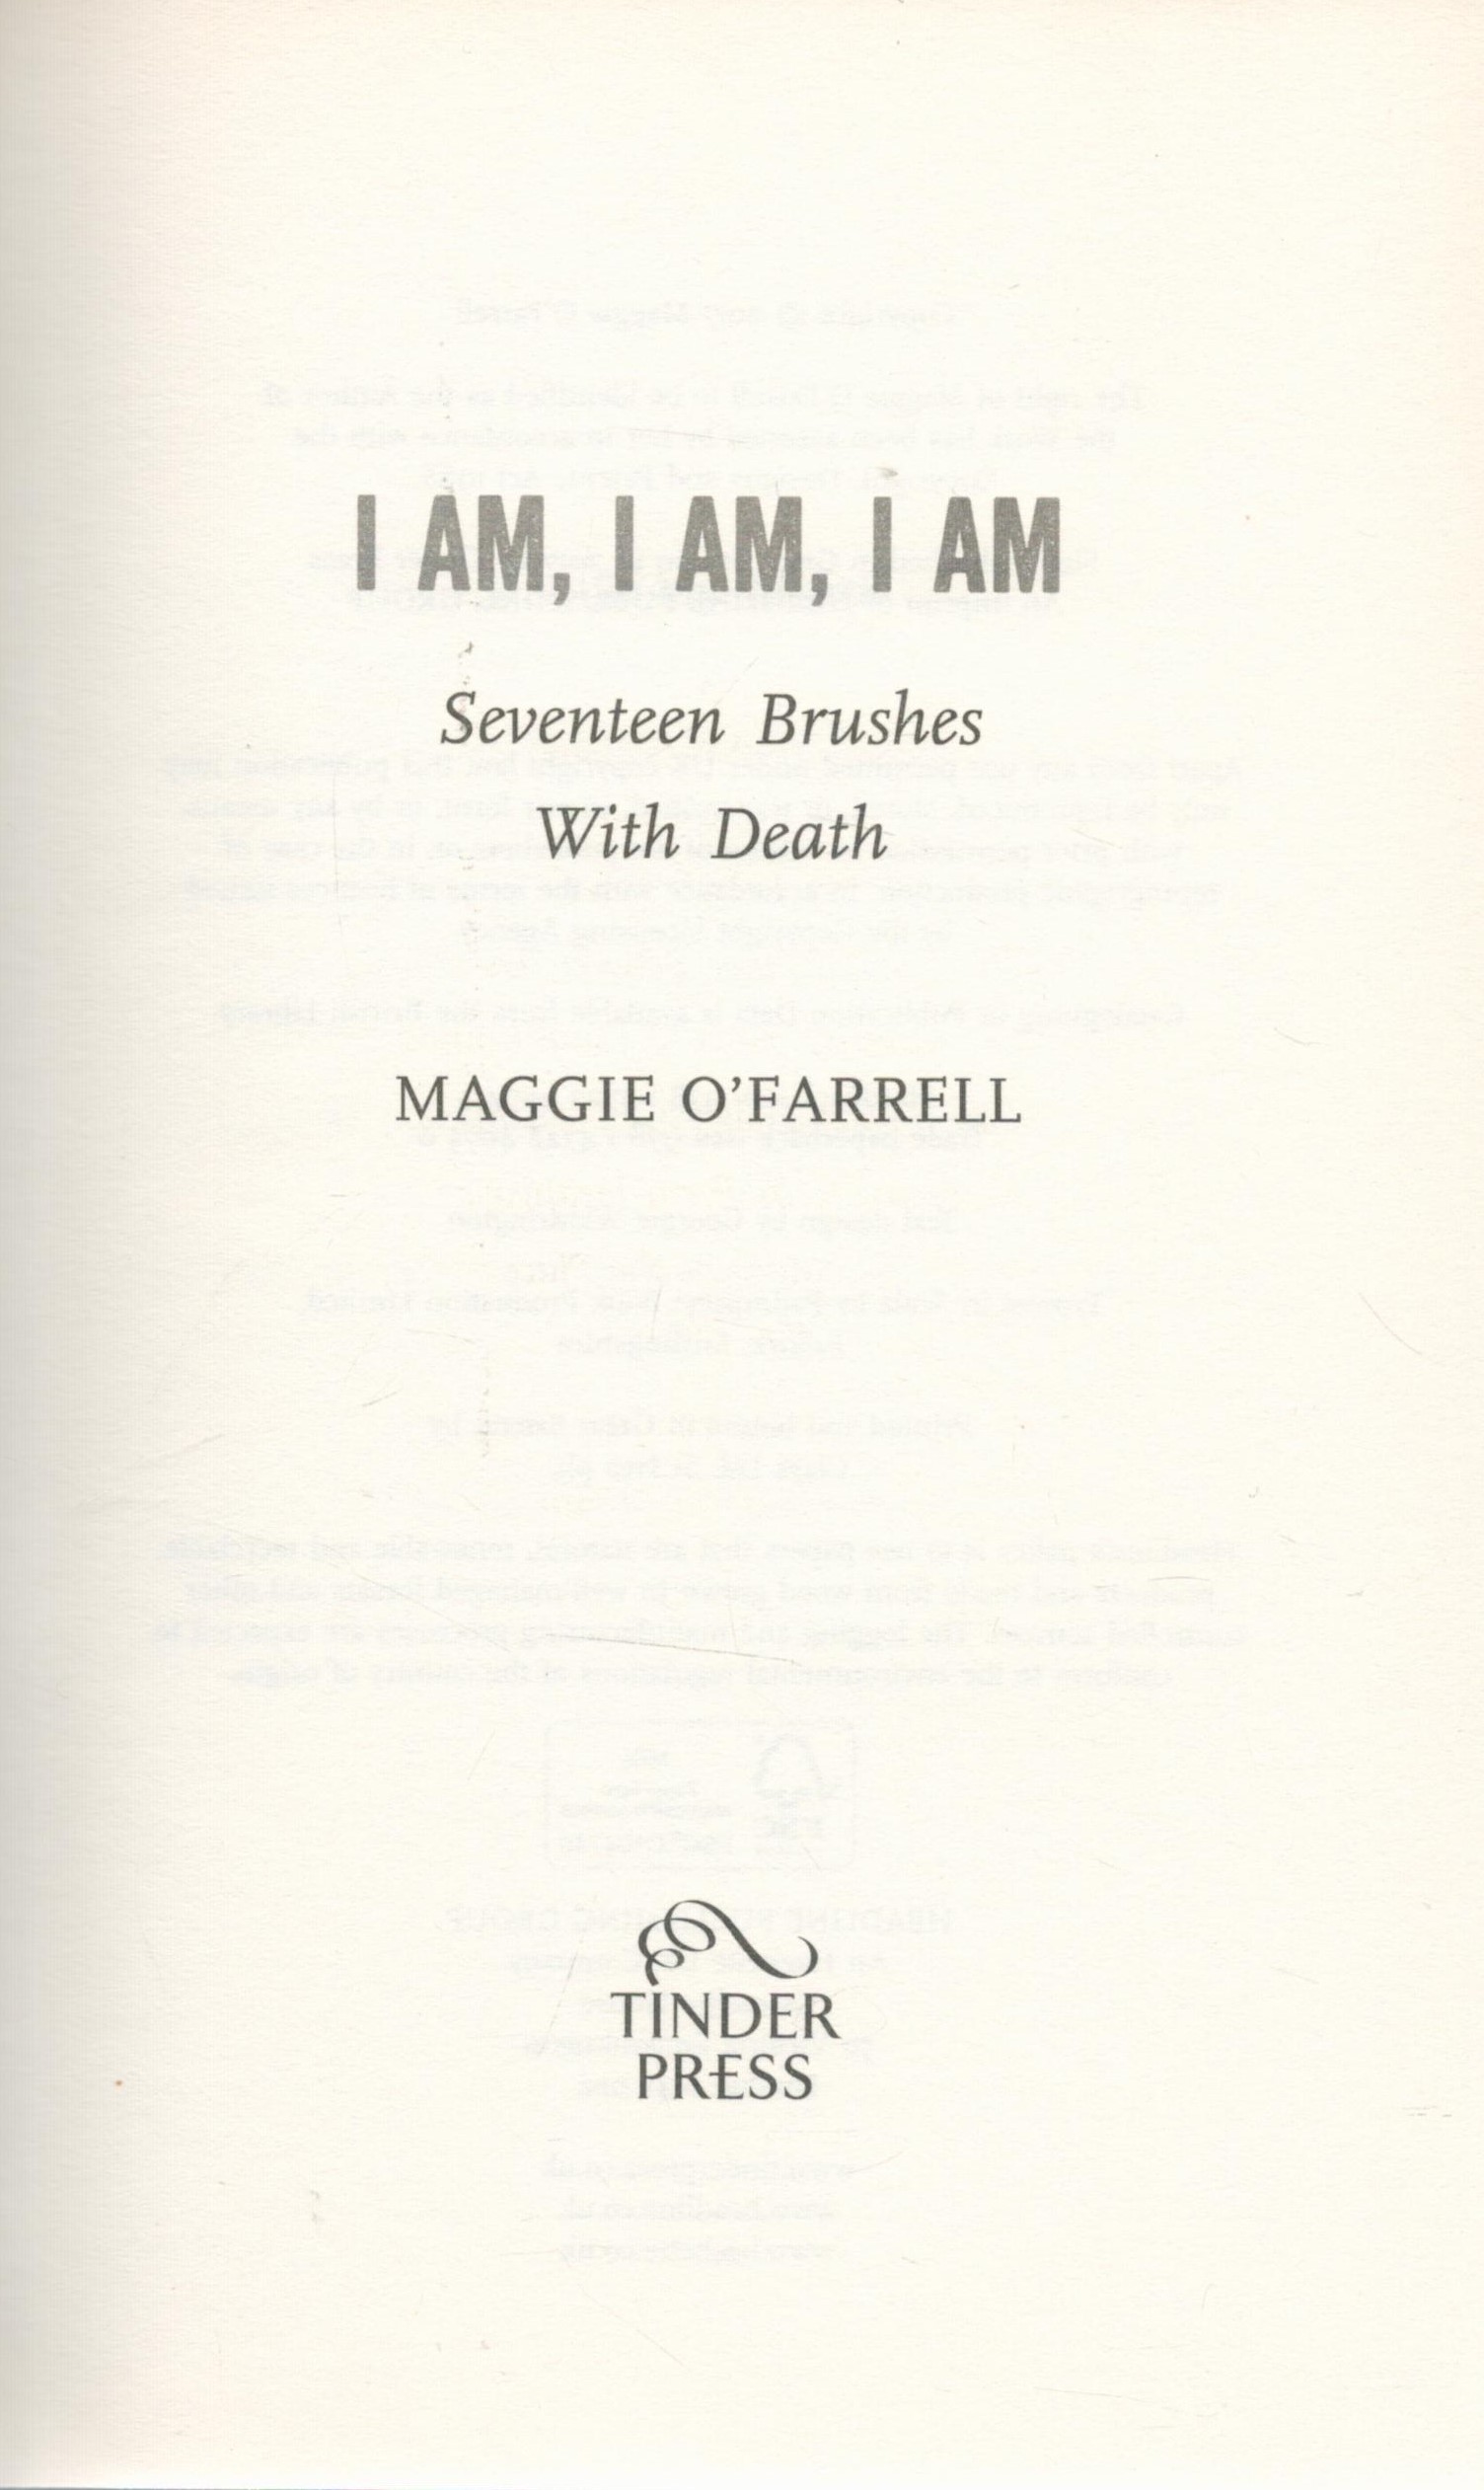 I Am, I Am, I Am, Seventeen Brushes with Death by Maggie O'Farrell 2017 First Edition Hardback - Image 2 of 3